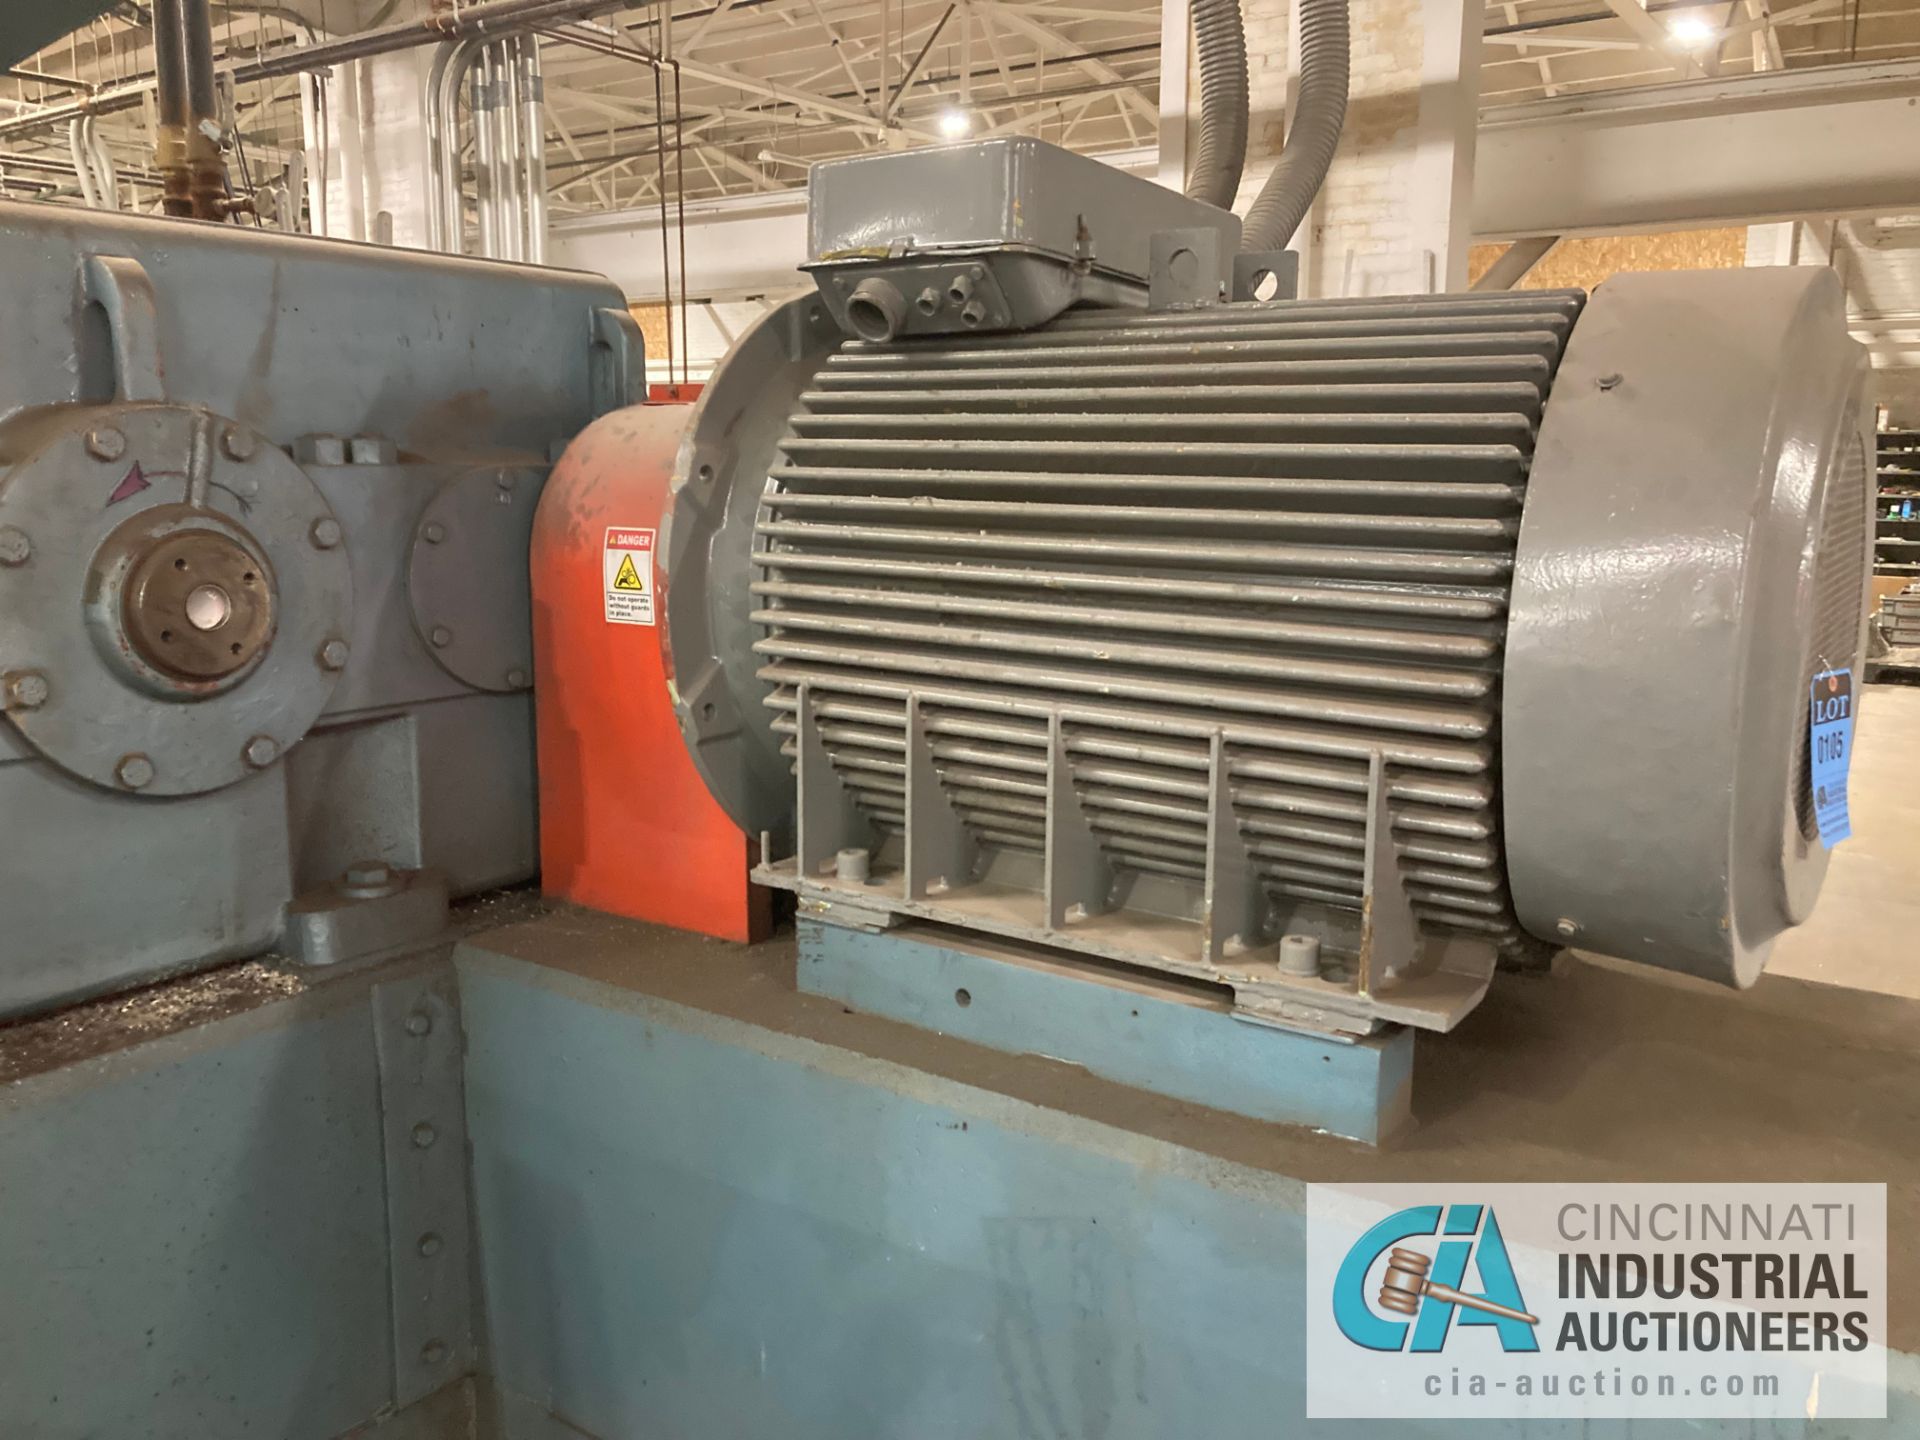 6" JOHNSON SINGLE SCREW EXTRUDER; S/N 4348-47, 30.1 L/D RATIO VENTED BARREL, 13.95 GEARBOX RATIO, - Image 6 of 15